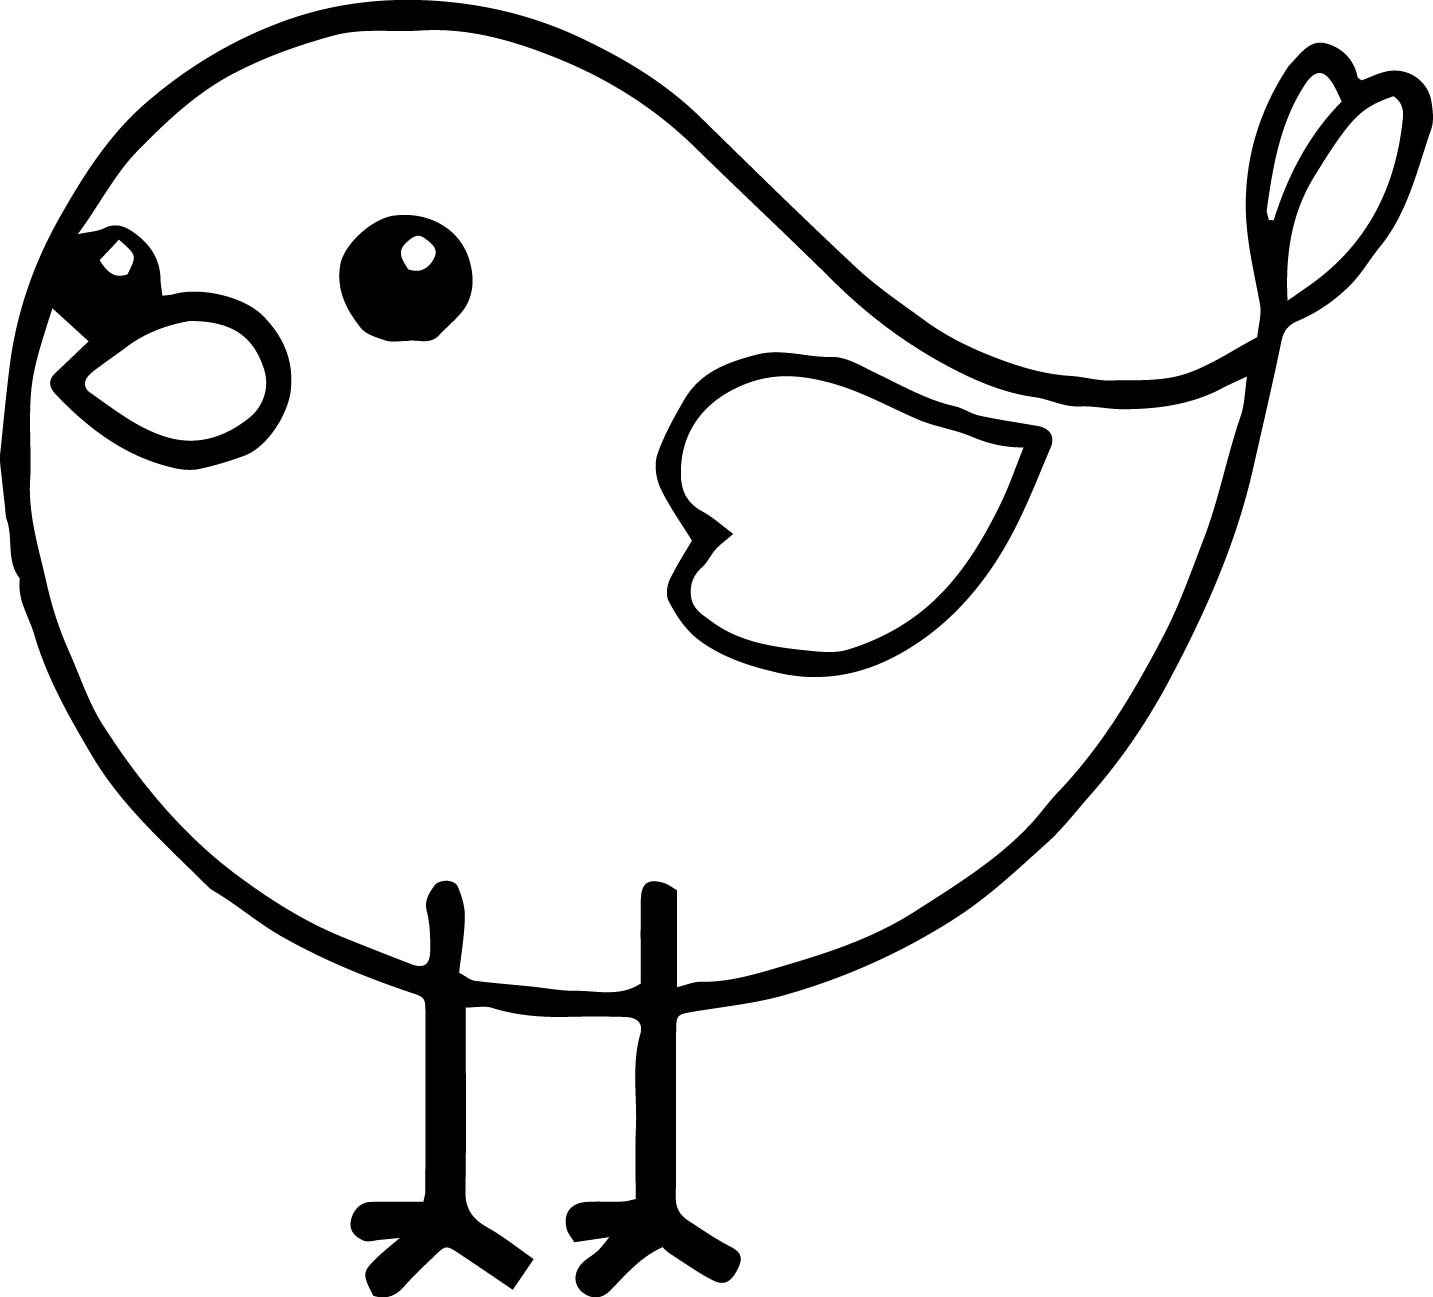 Cute Bird Coloring Pages At GetColorings Free Printable Colorings Pages To Print And Color